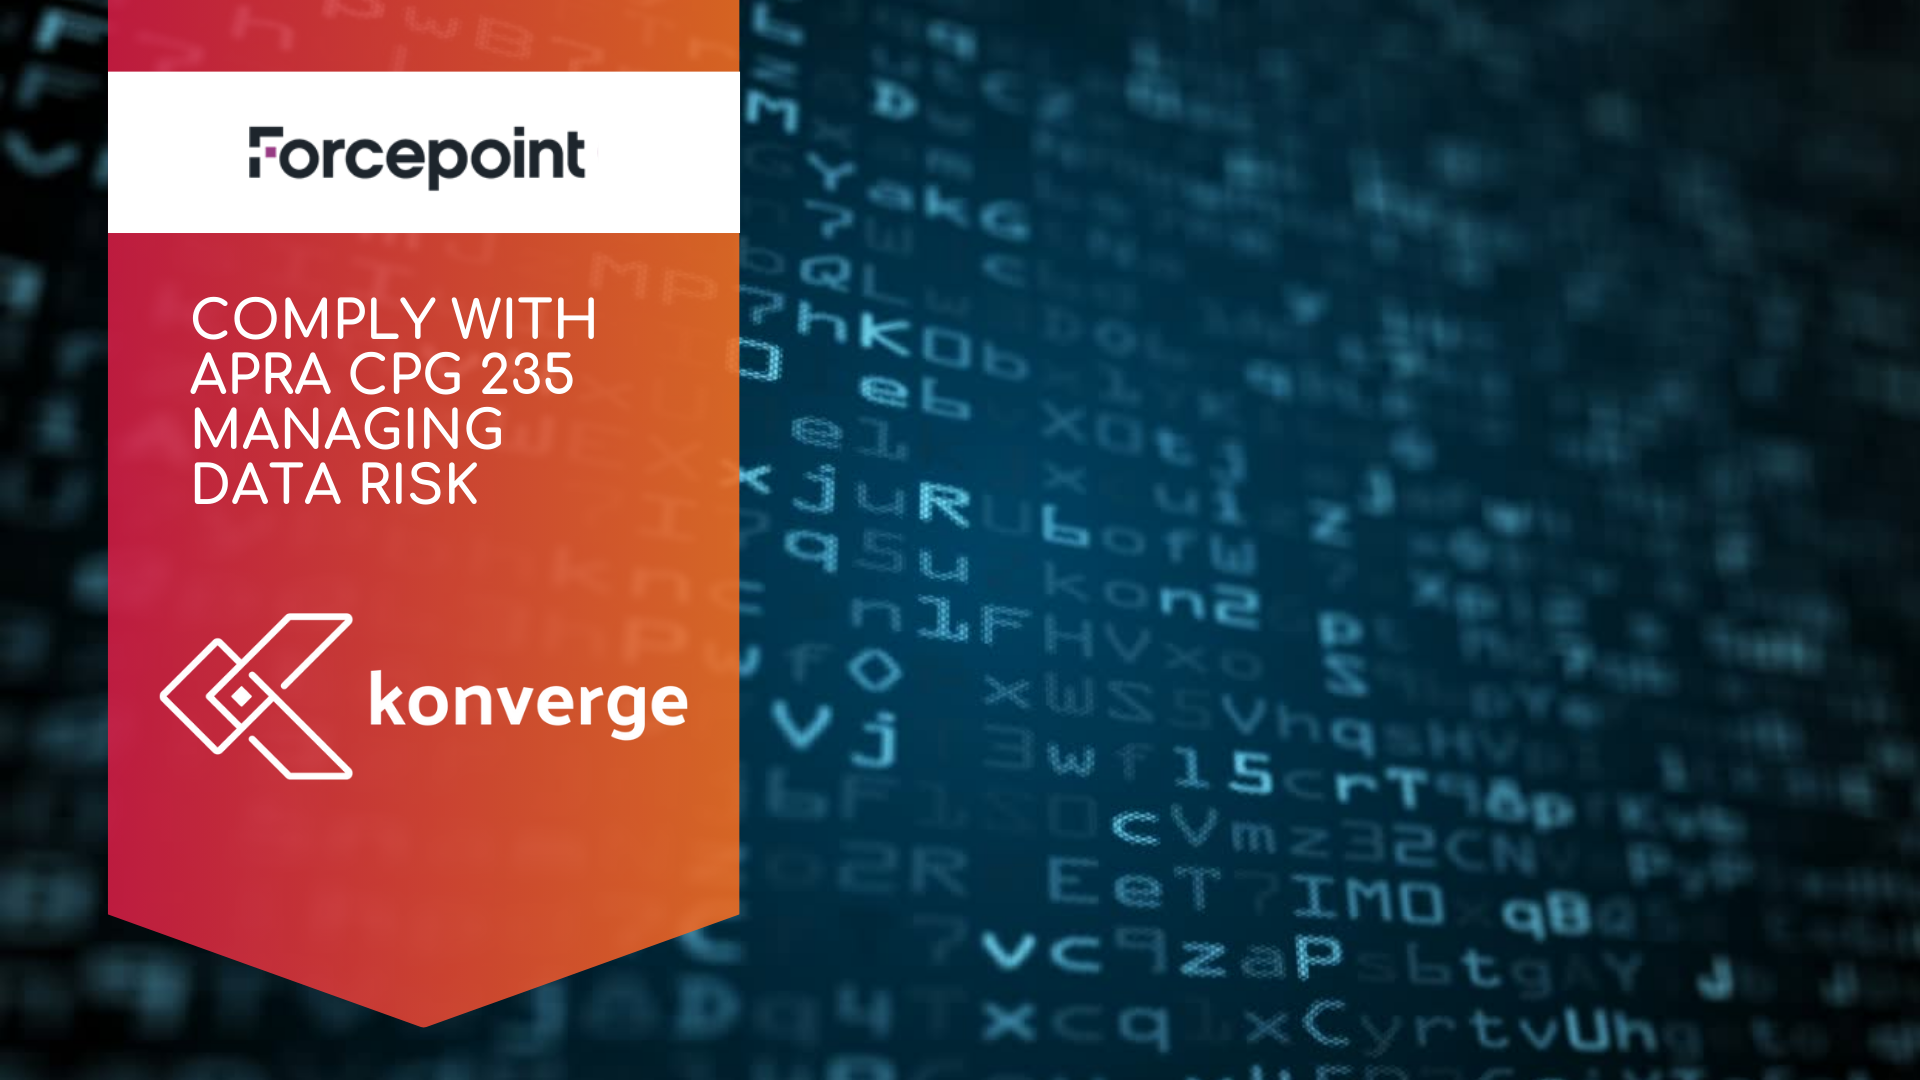 Meeting CPG 235 APRA requirements with a holistic security solution - Forcepoint.